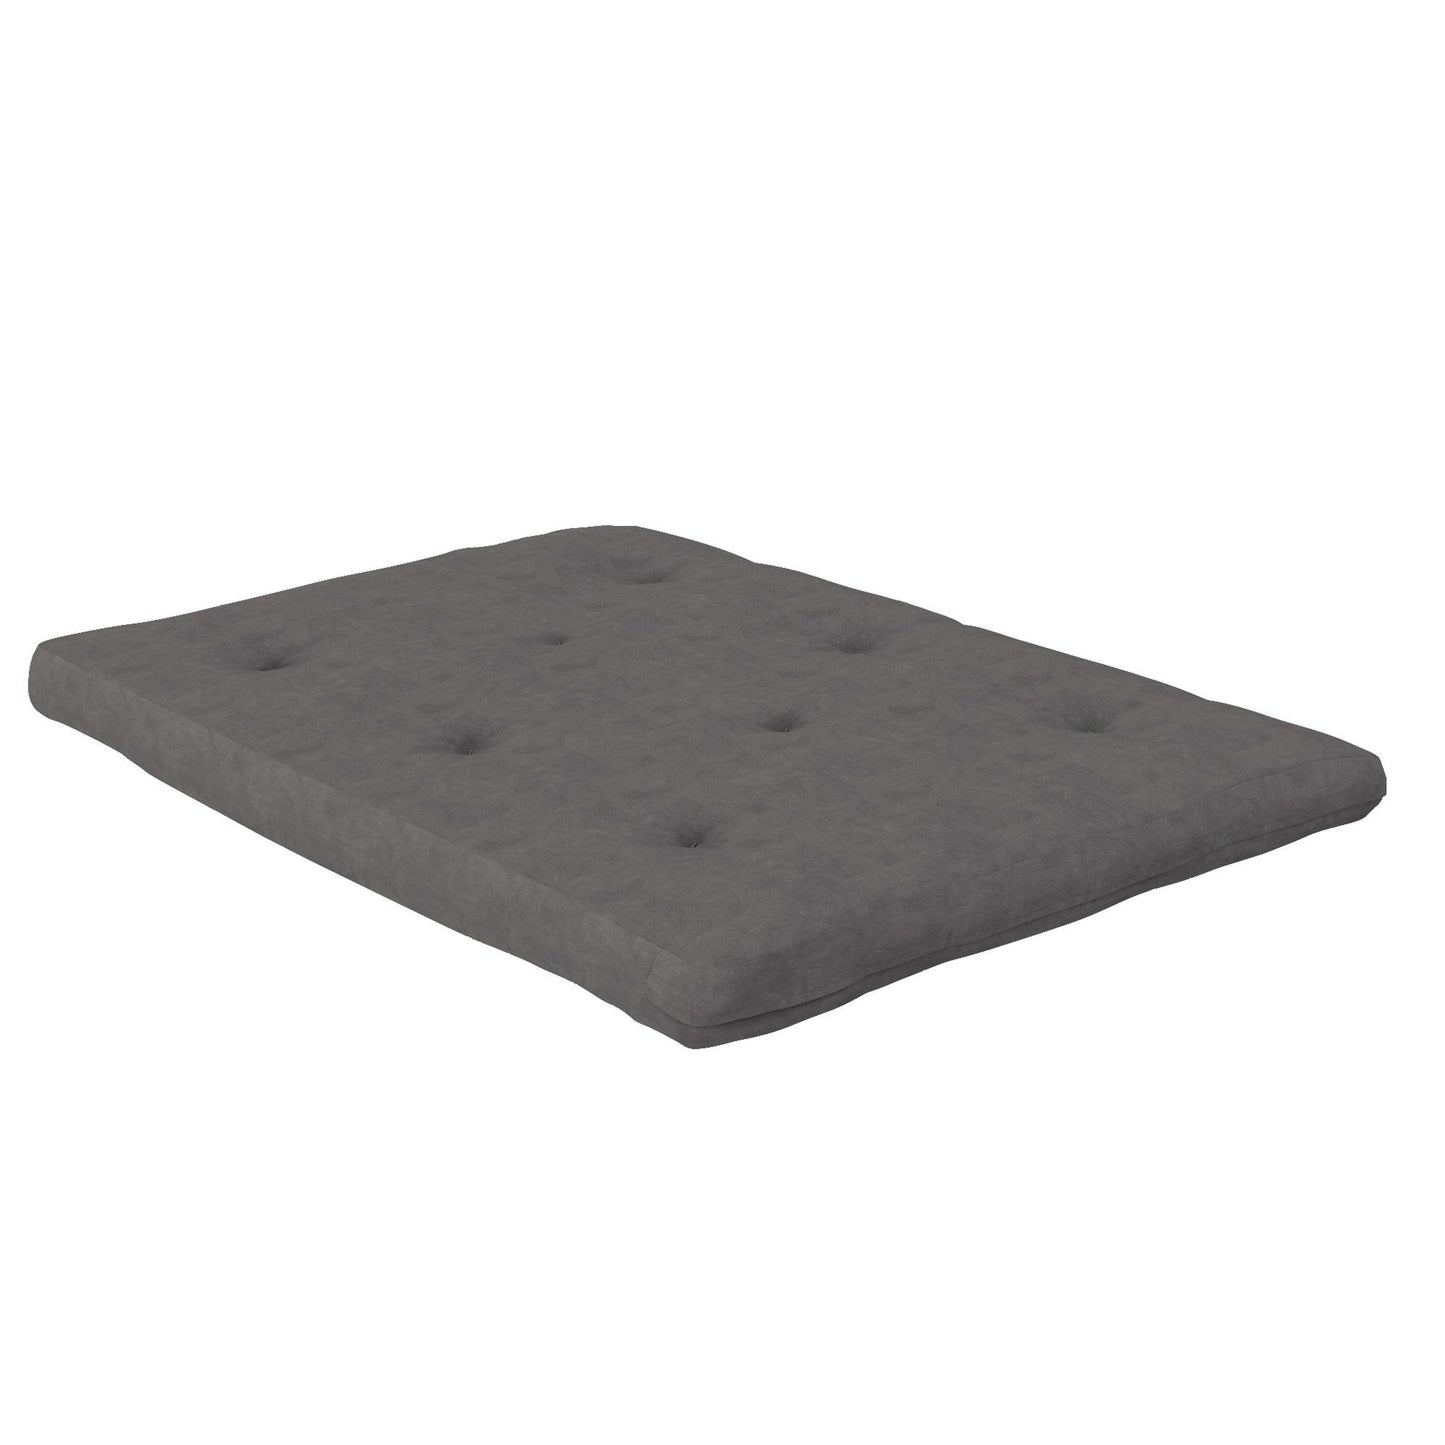 Eve 6 Inch Thermobonded High Density Polyester Fill Futon Mattress - Gray - Full